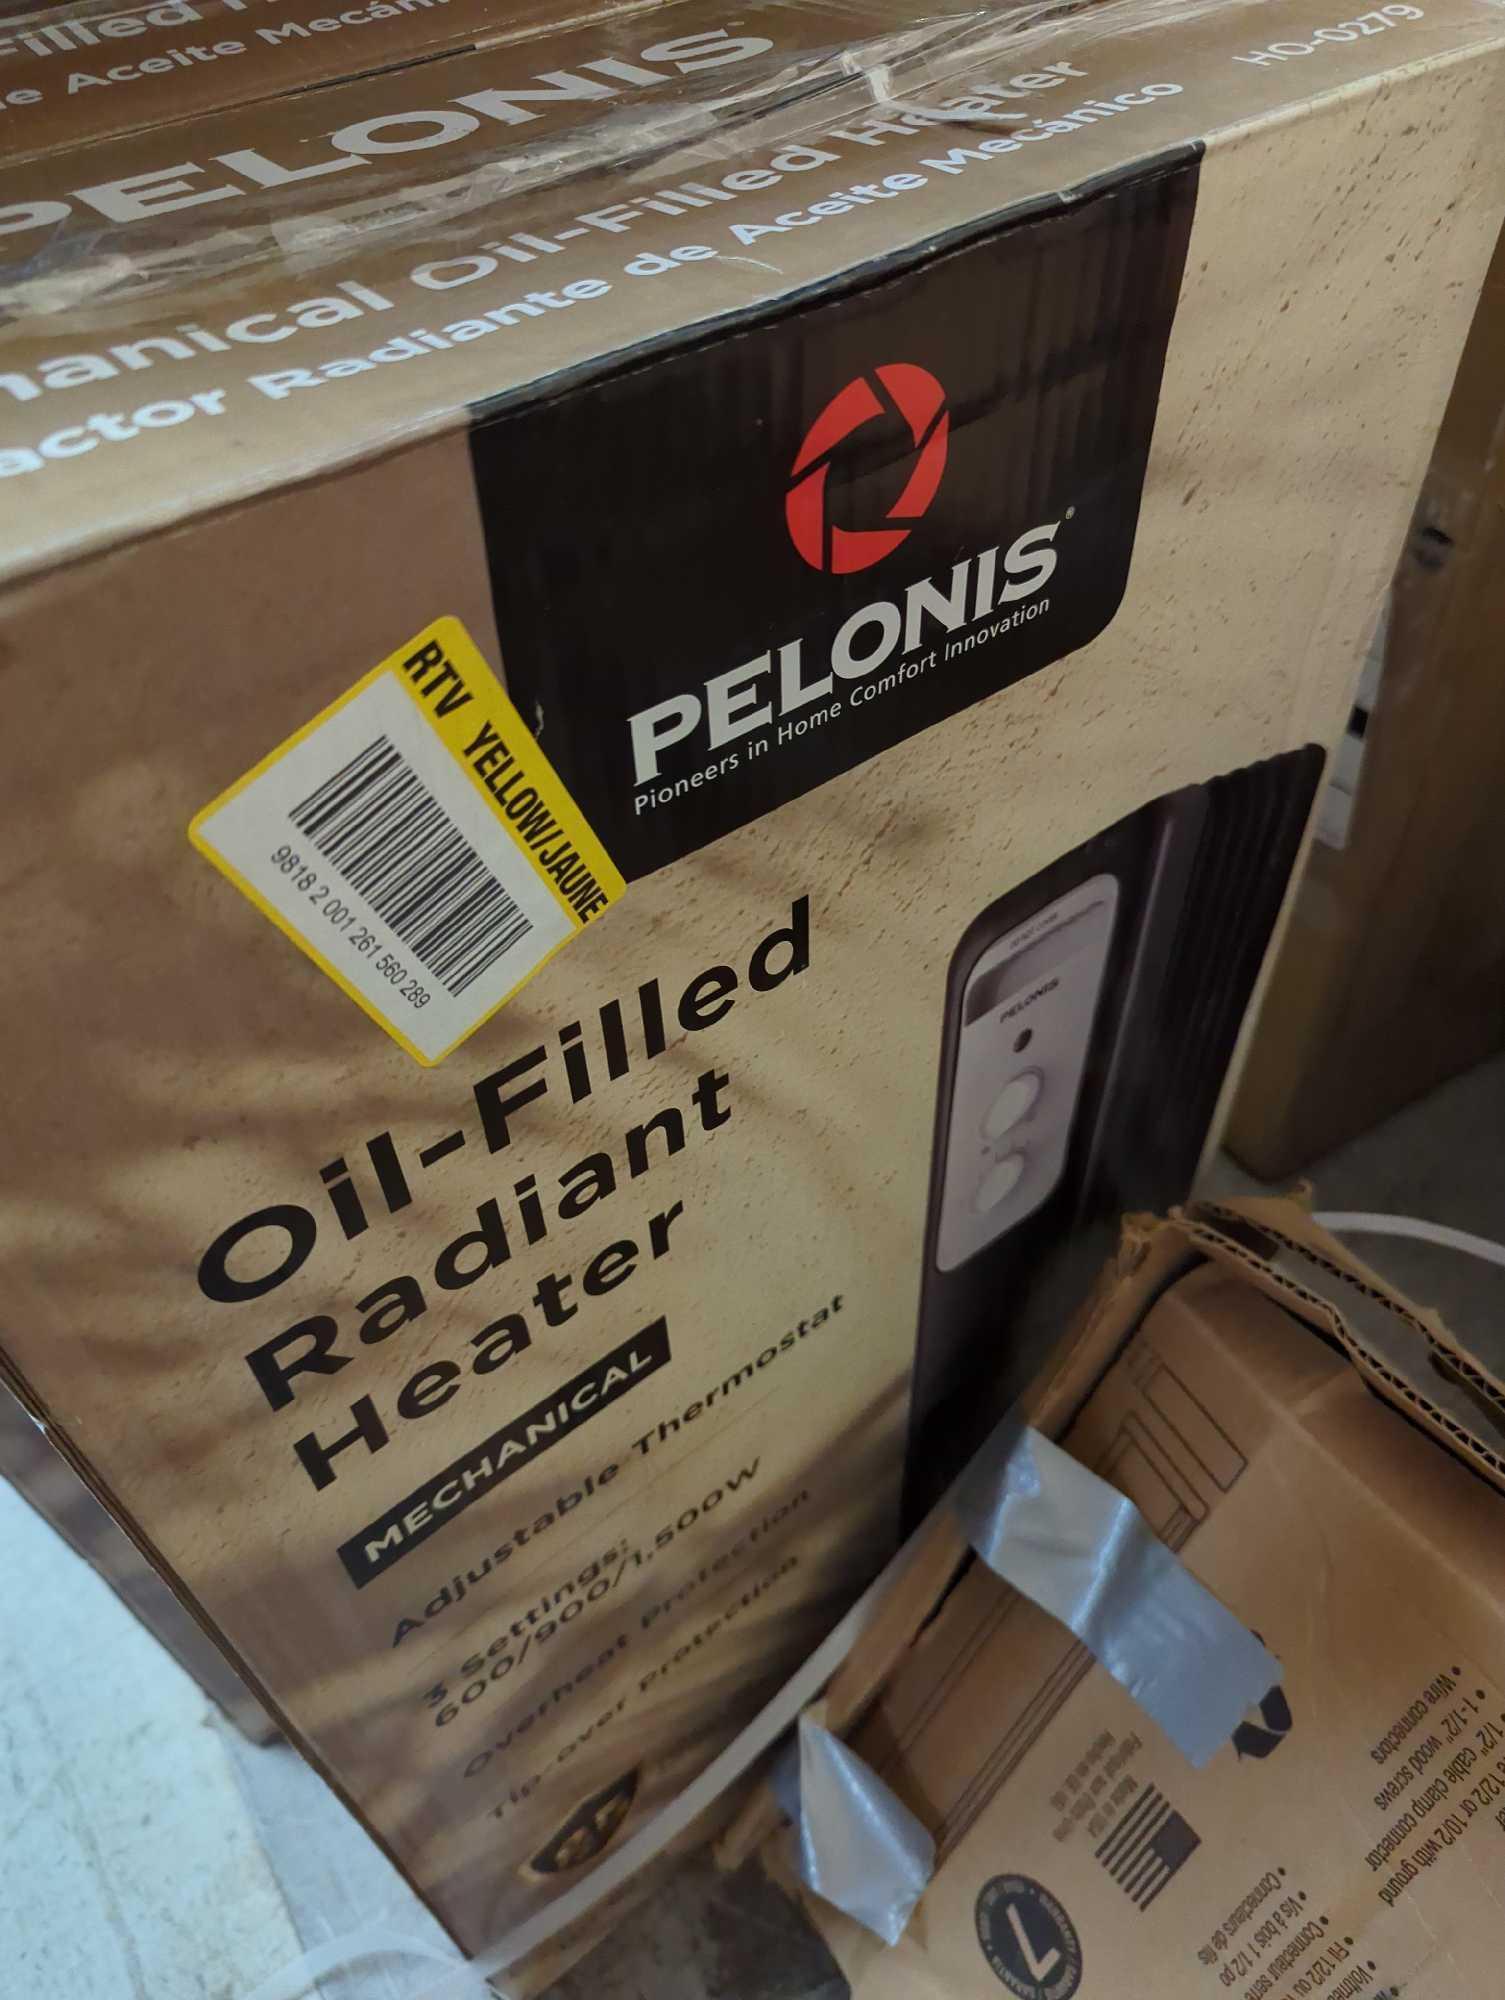 Pelonis 1,500-Watt Oil-Filled Radiant Electric Space Heater with Thermostat, Appears to be New in